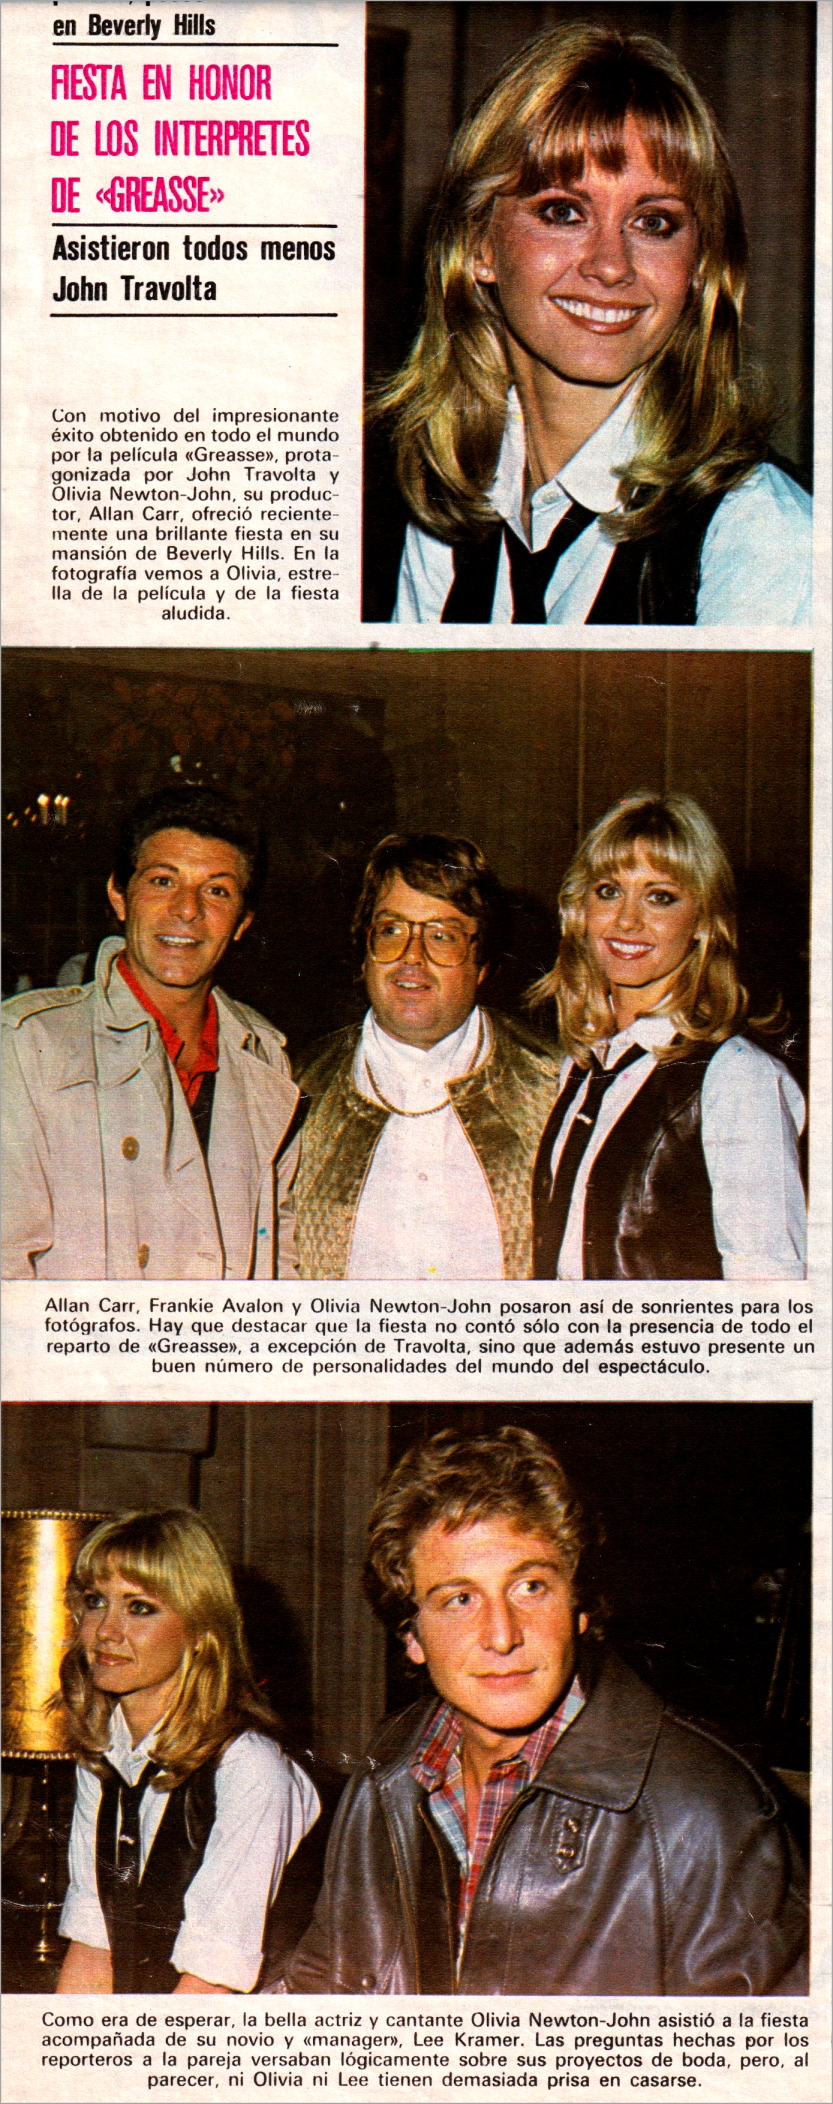 Allan Carr party at his Beverly Hills' mansion - Hola!